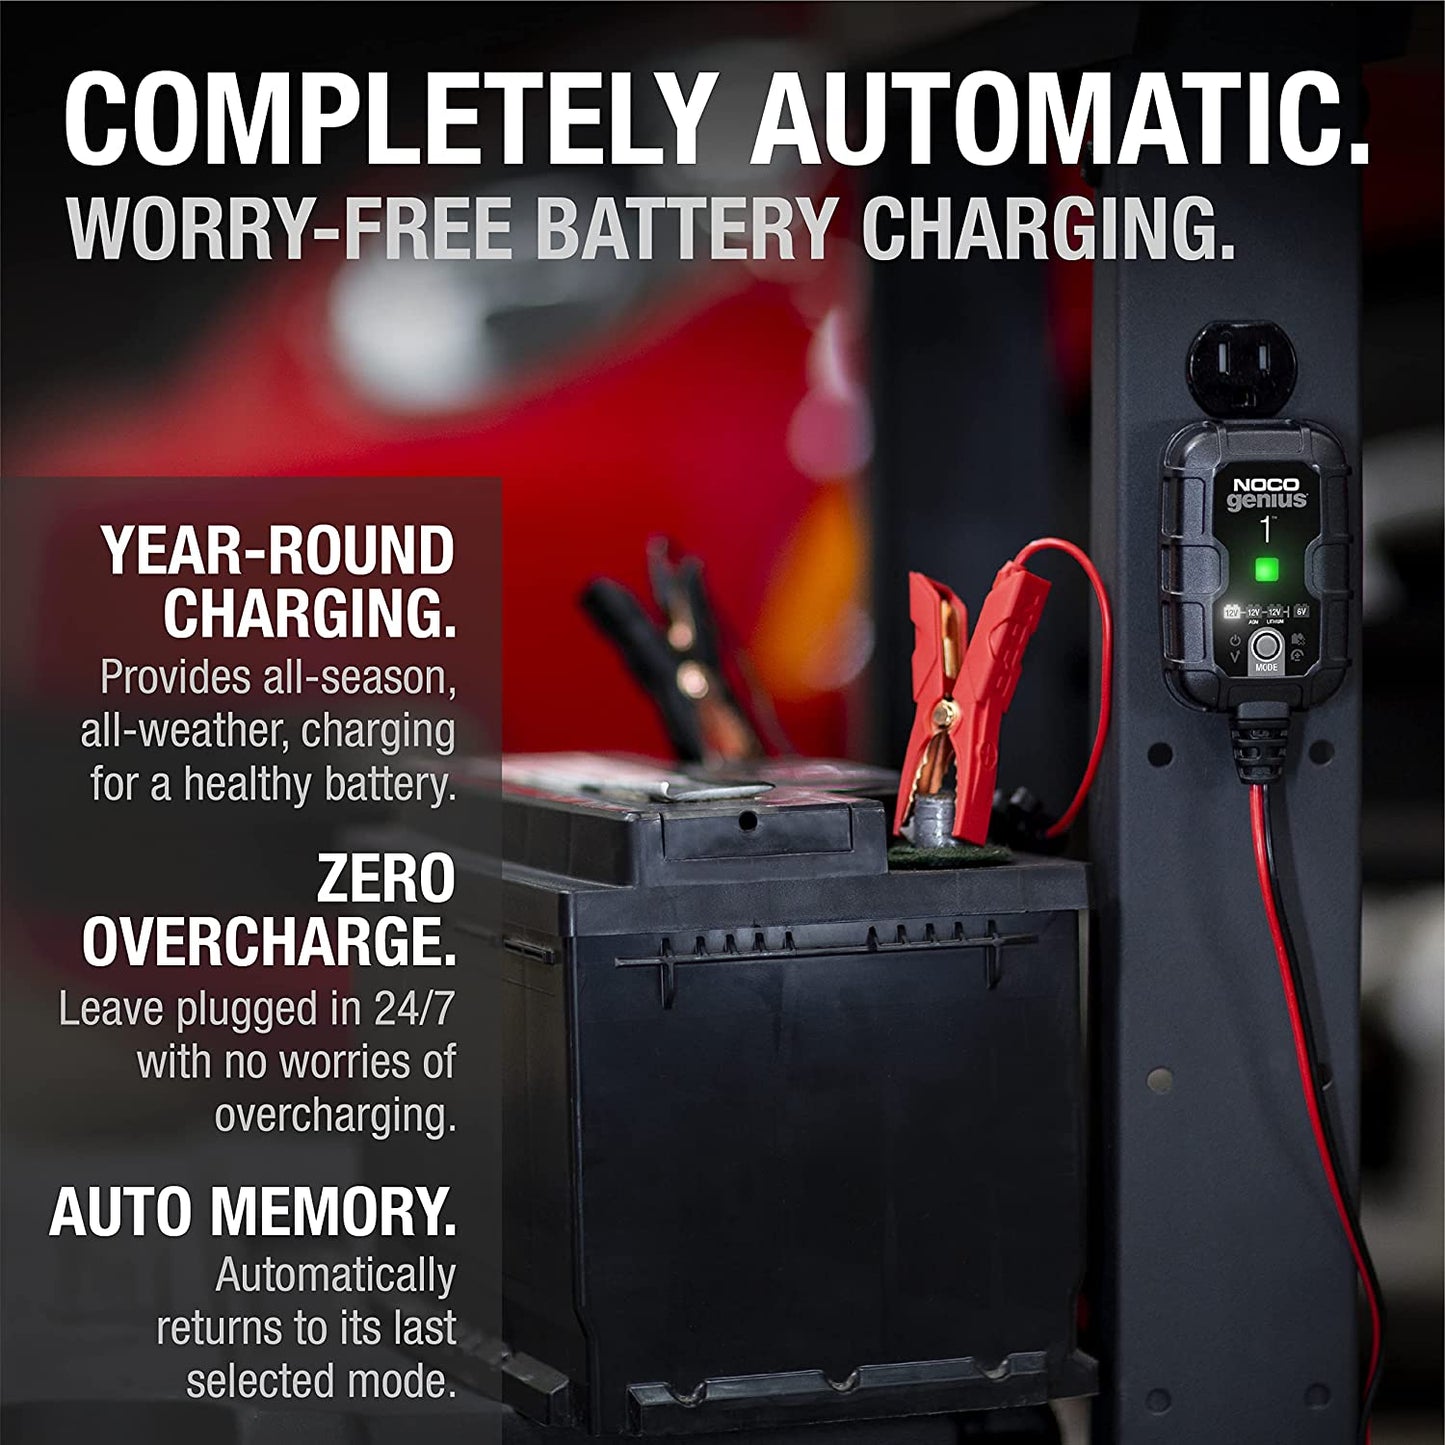 NOCO GENIUS1 6V and 12V Automotive Charger, Battery Maintainer, Trickle Charger, Float Charger, and Desulfator